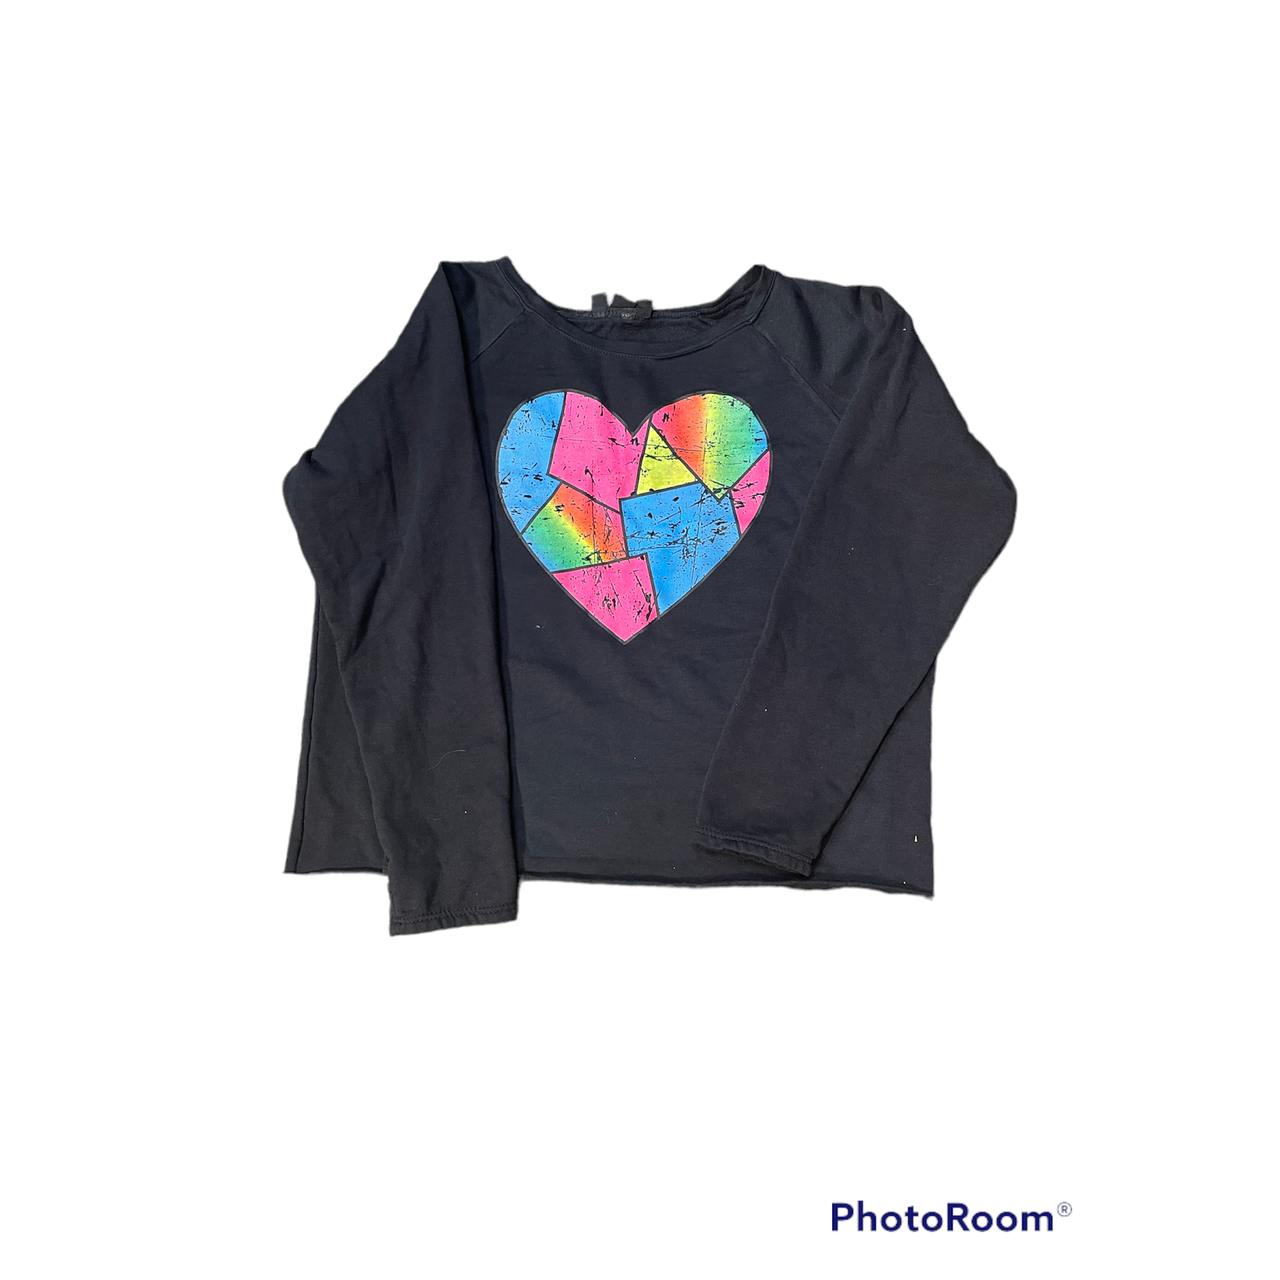 patched neon heart shirt